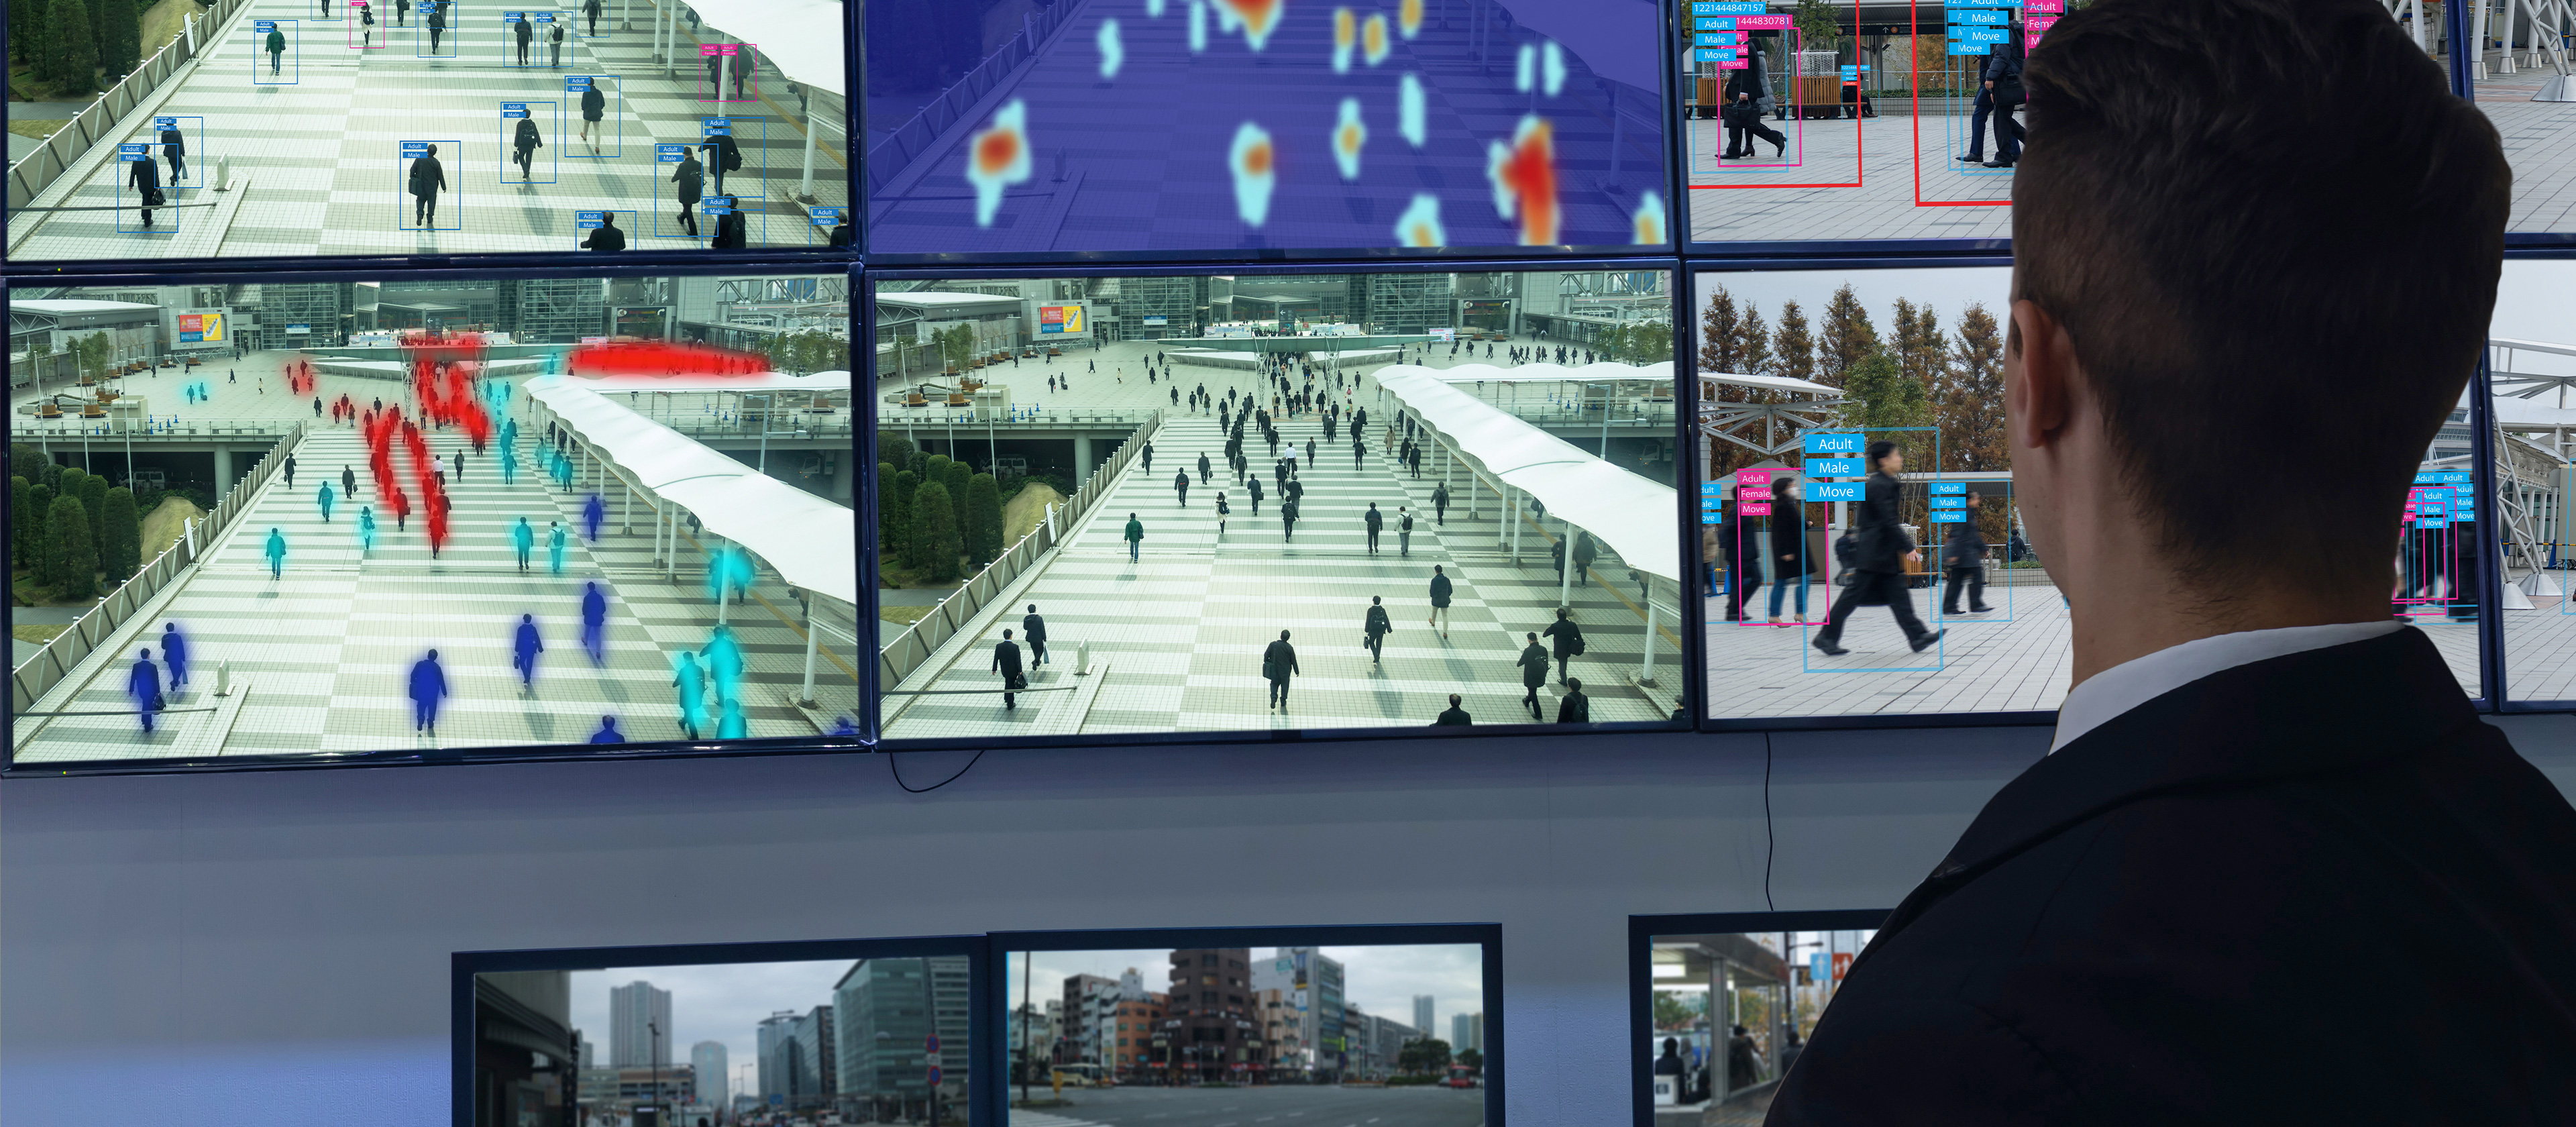 Decorative image of man watching multiple security monitors